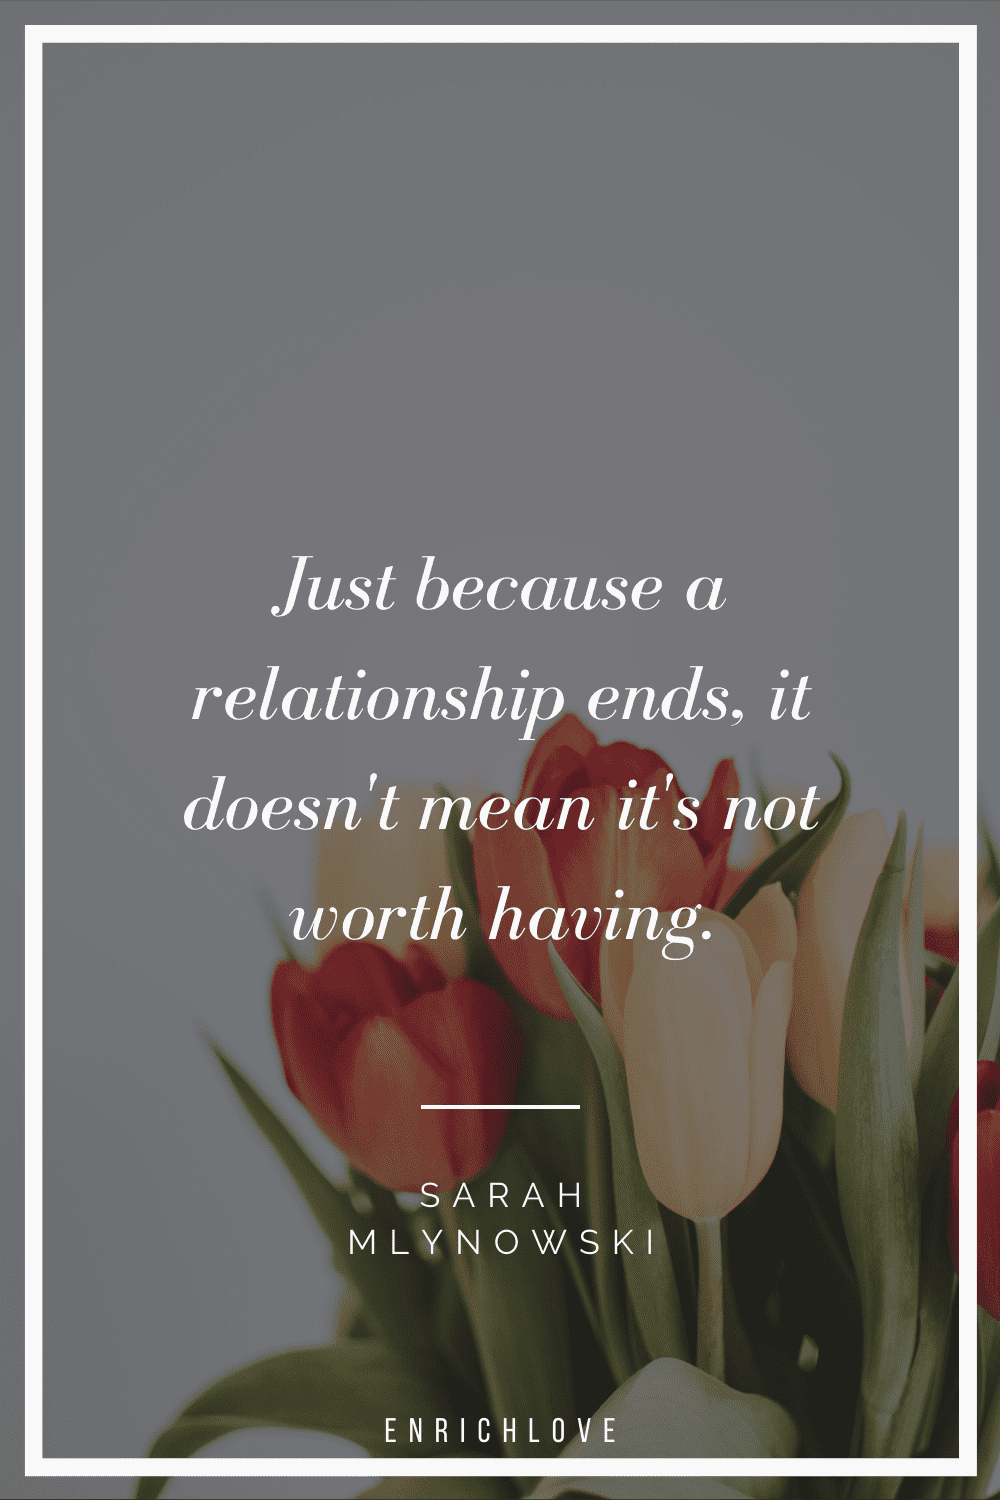 Just because a relationship ends, it doesn't mean it's not worth having.